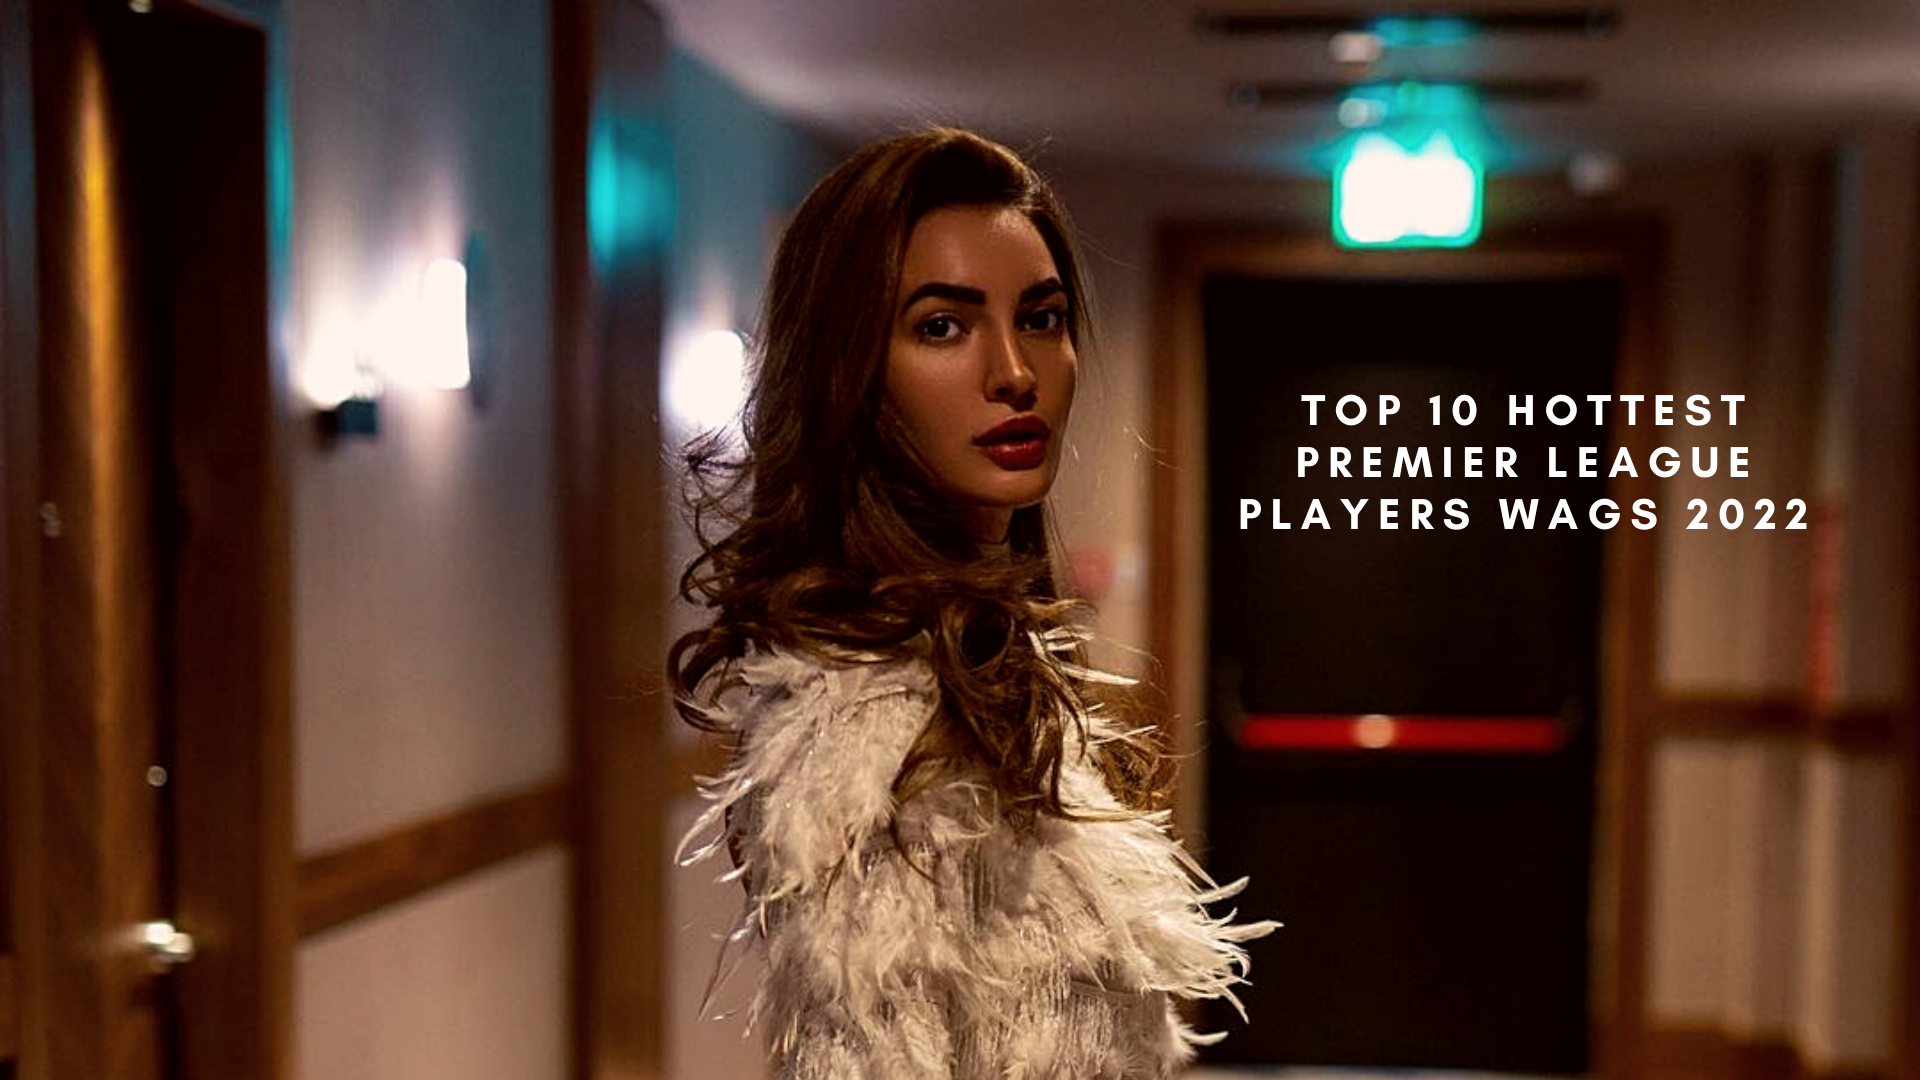 Here is the list of Top 10 Hottest Premier League Players WAGs 2022. (Credit: Instagram)